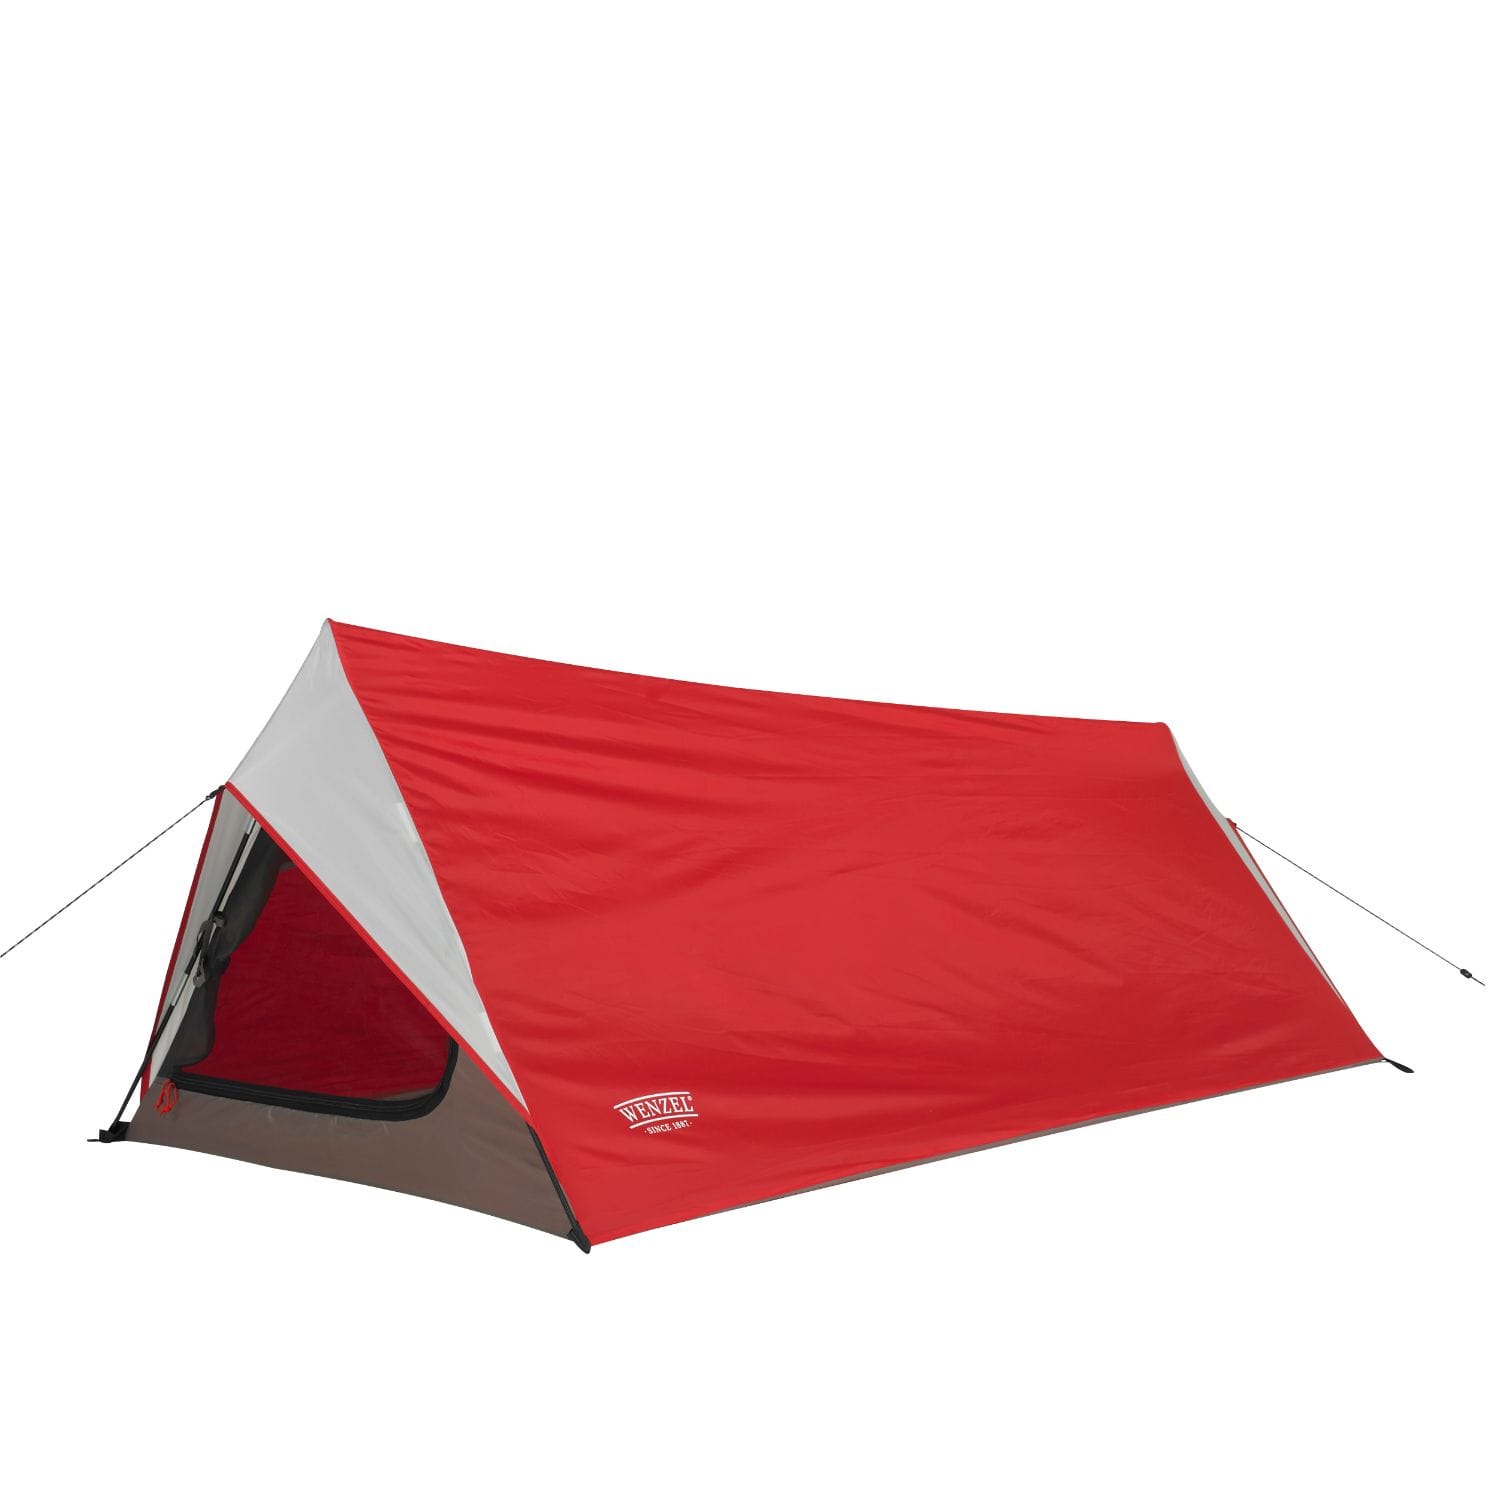 Wenzel Camping & Outdoor : Tents Wenzel Starlite 1 Person Backpacking Tent